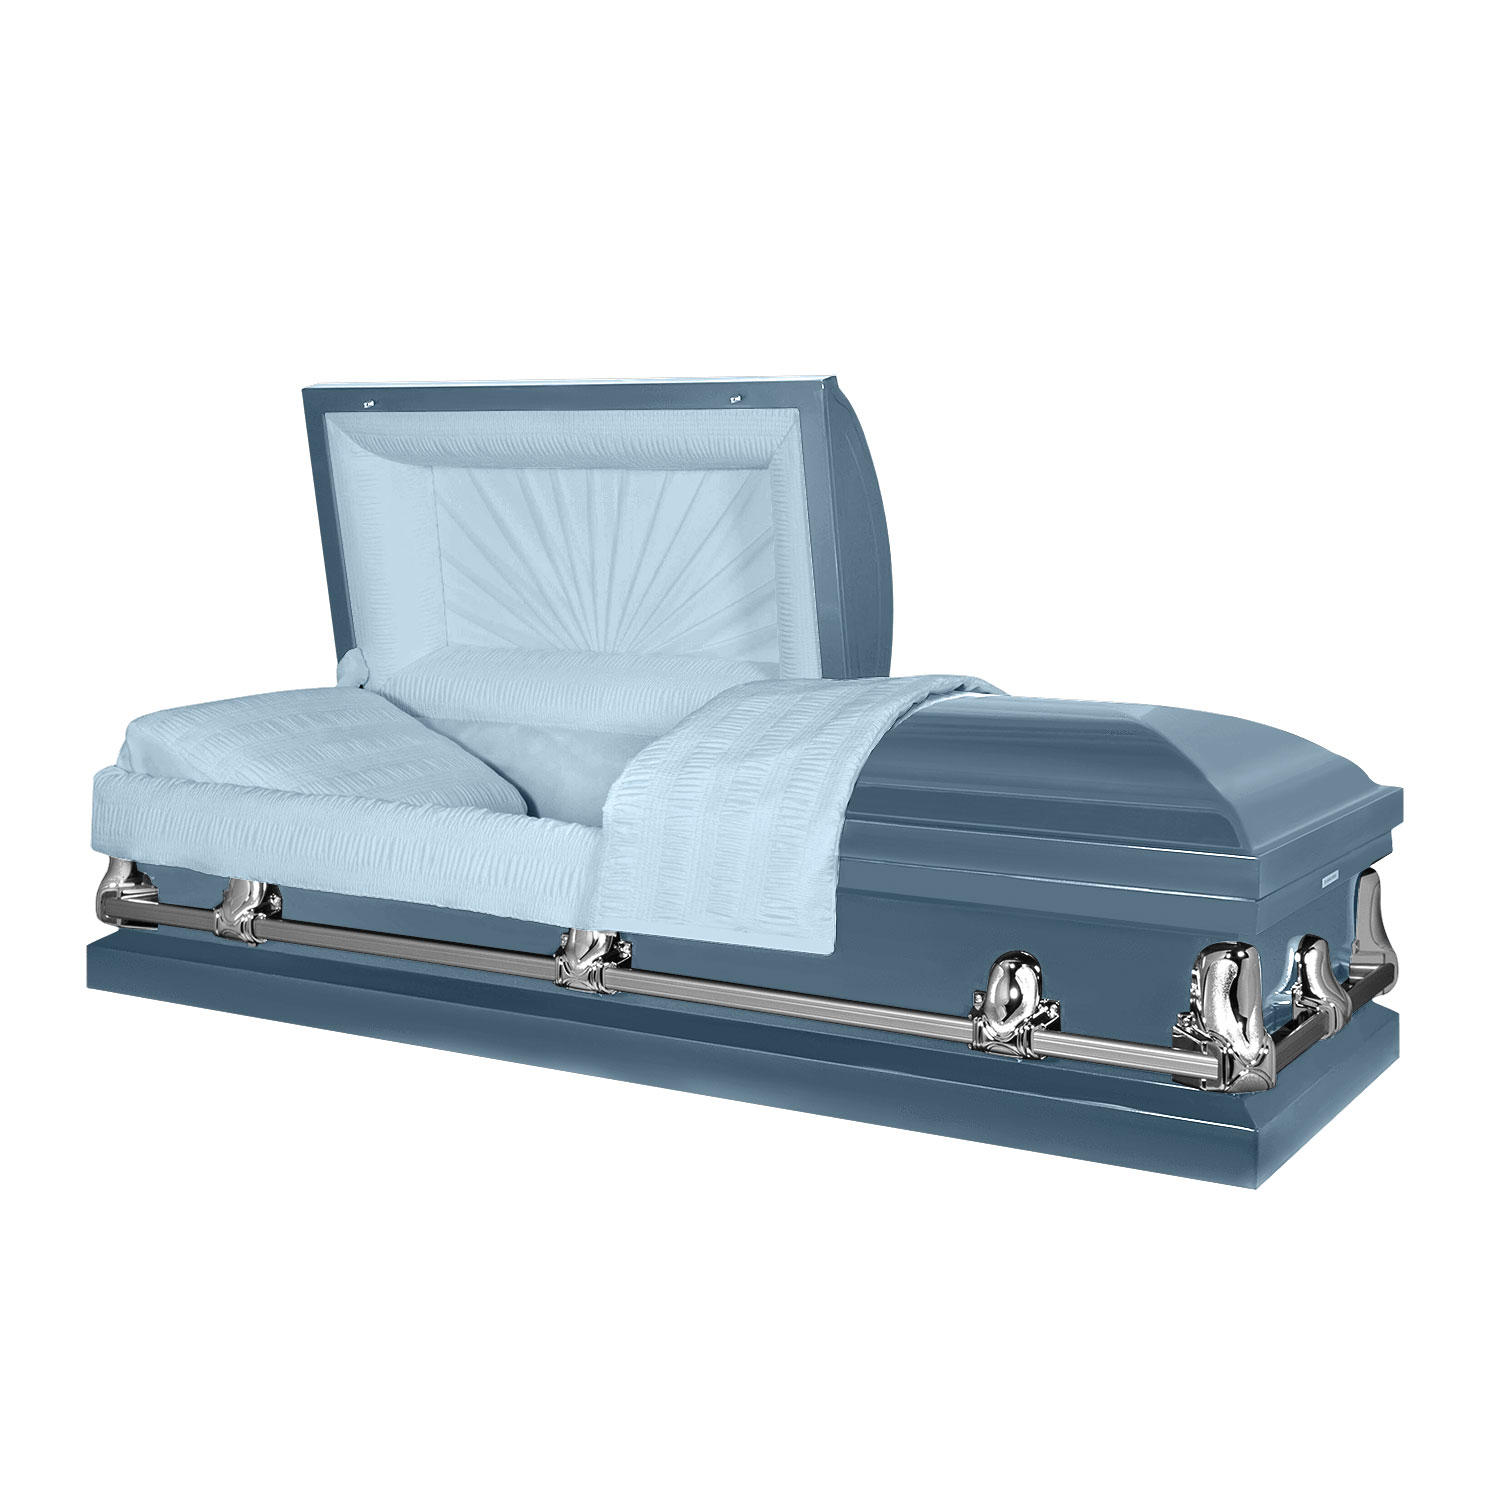 Titan Funeral Casket Multiple Colors $1149 w/Free Shipping For Sam's Plus Members(Also including option for non Sams members)